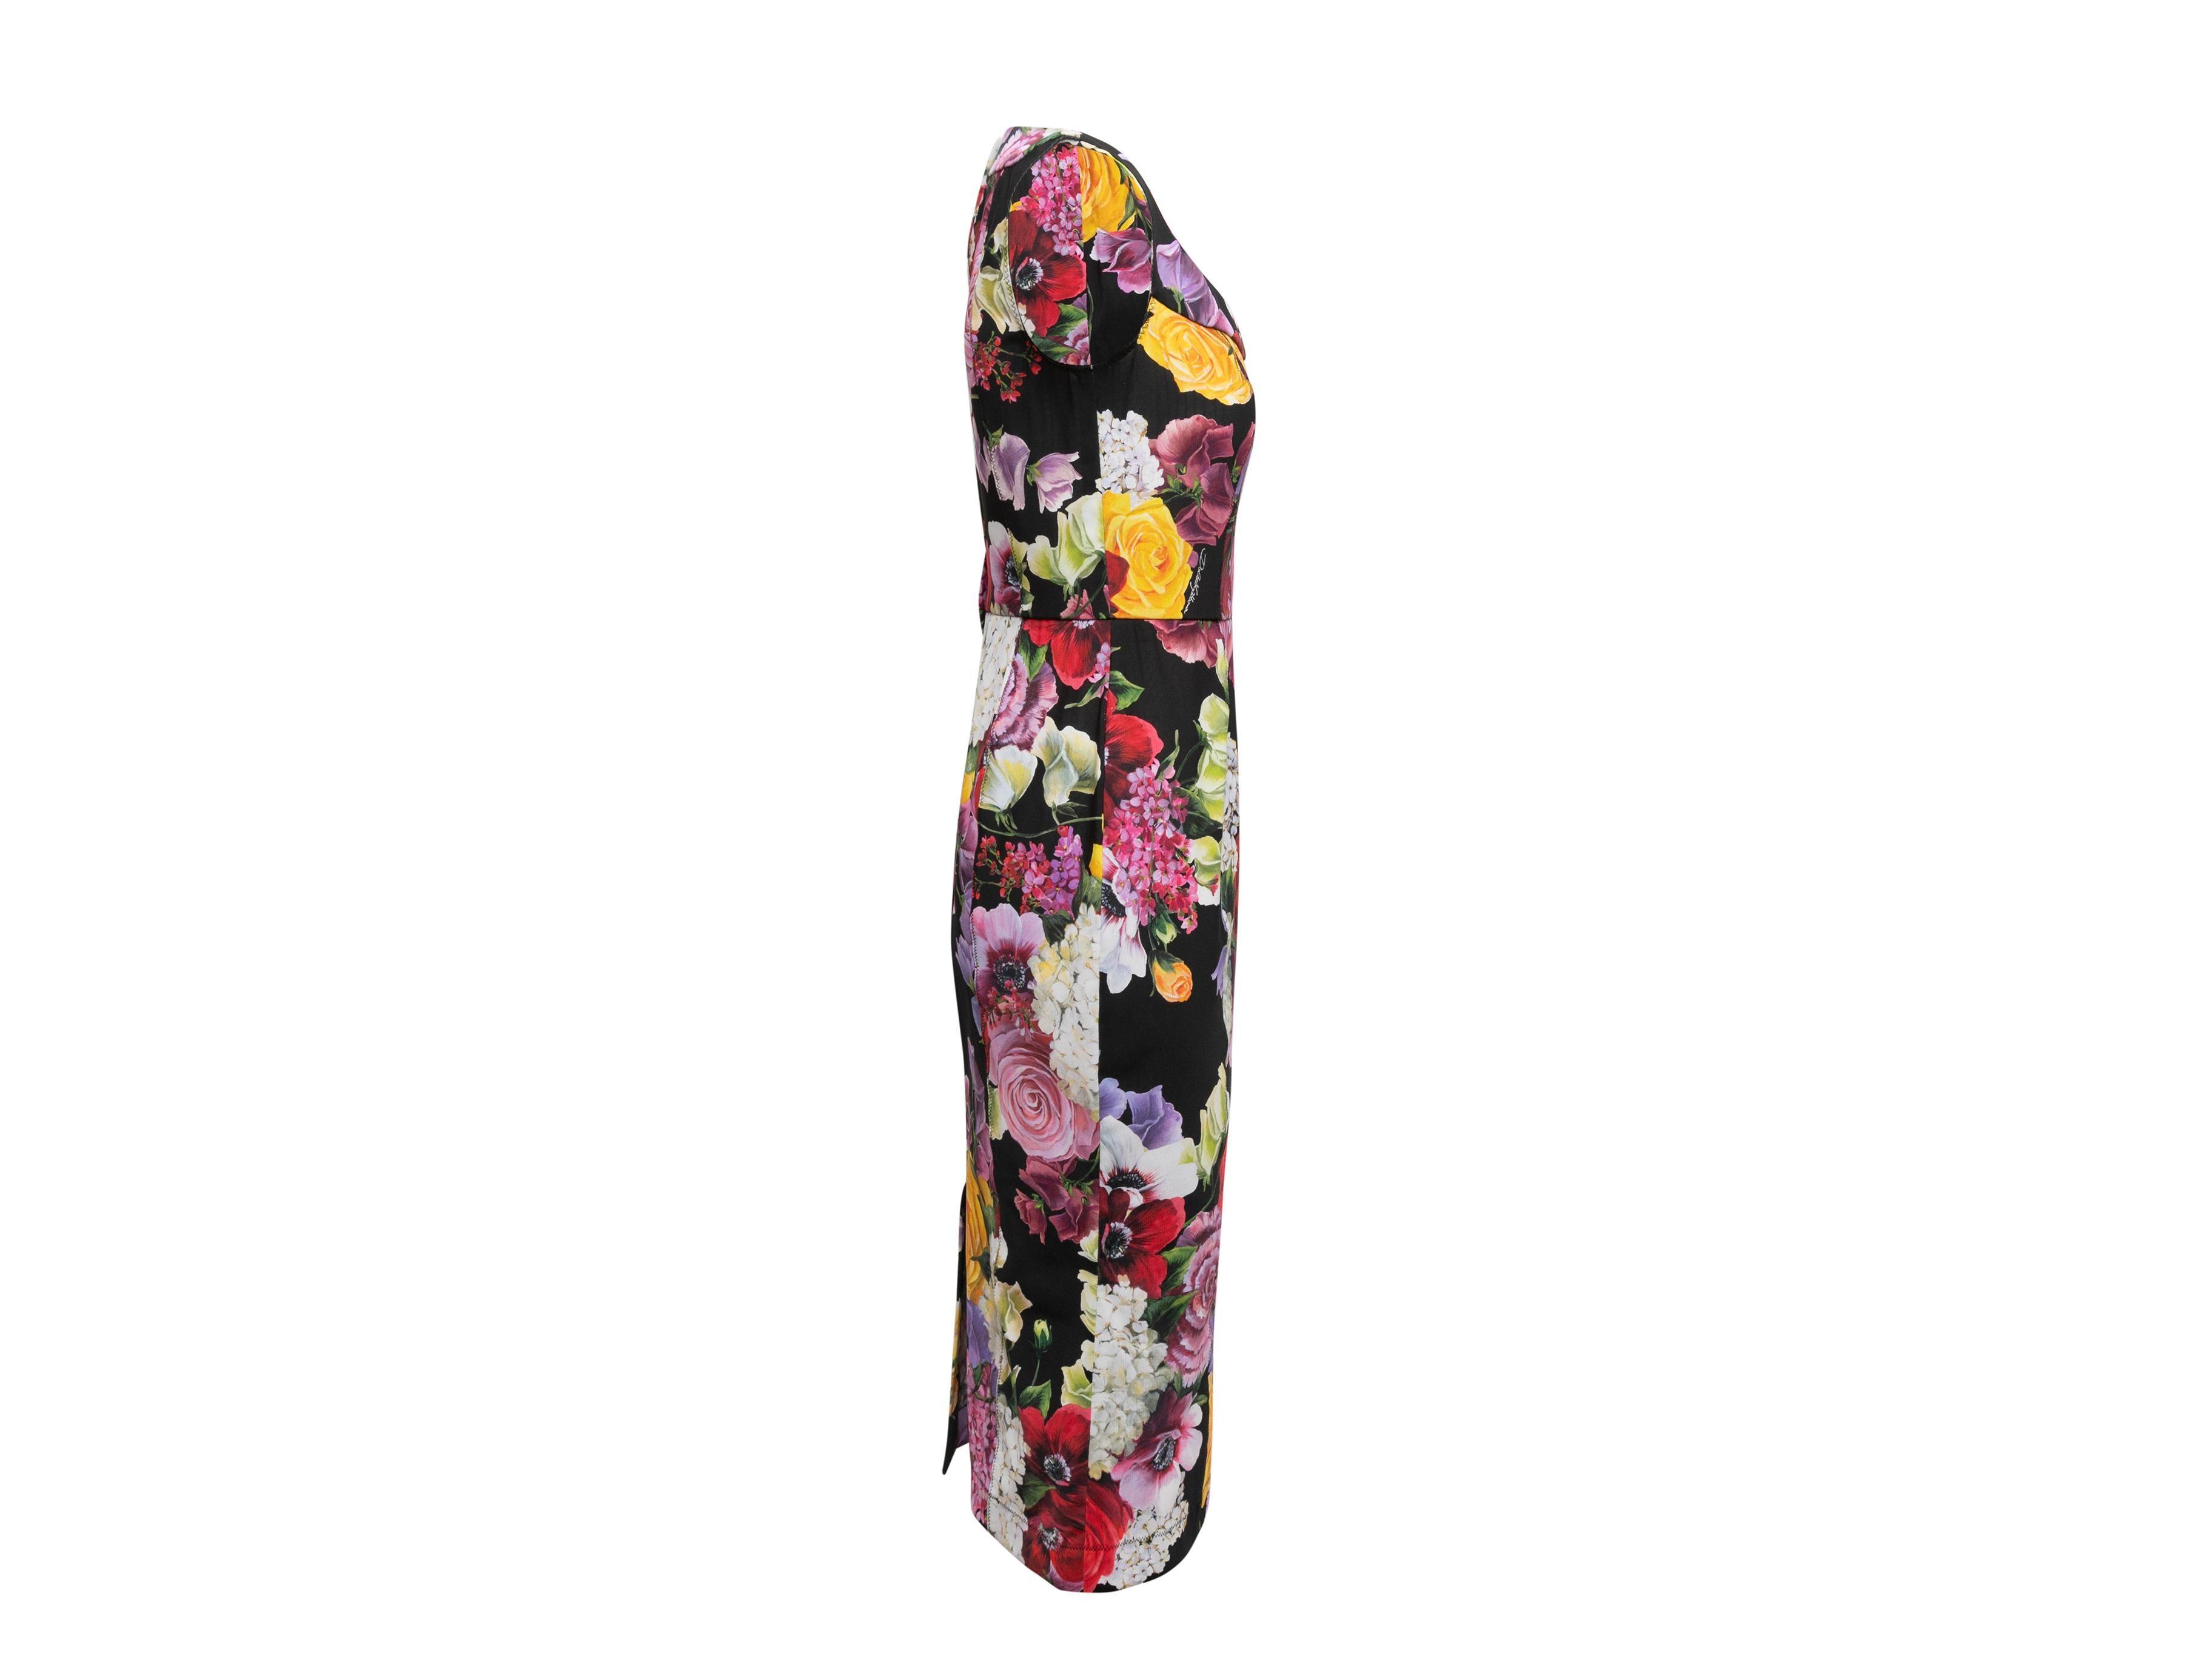 Black and multicolor floral print sleeveless bodycon dress by Dolce & Gabbana. Scoop neckline. Zip closure at center back. 34